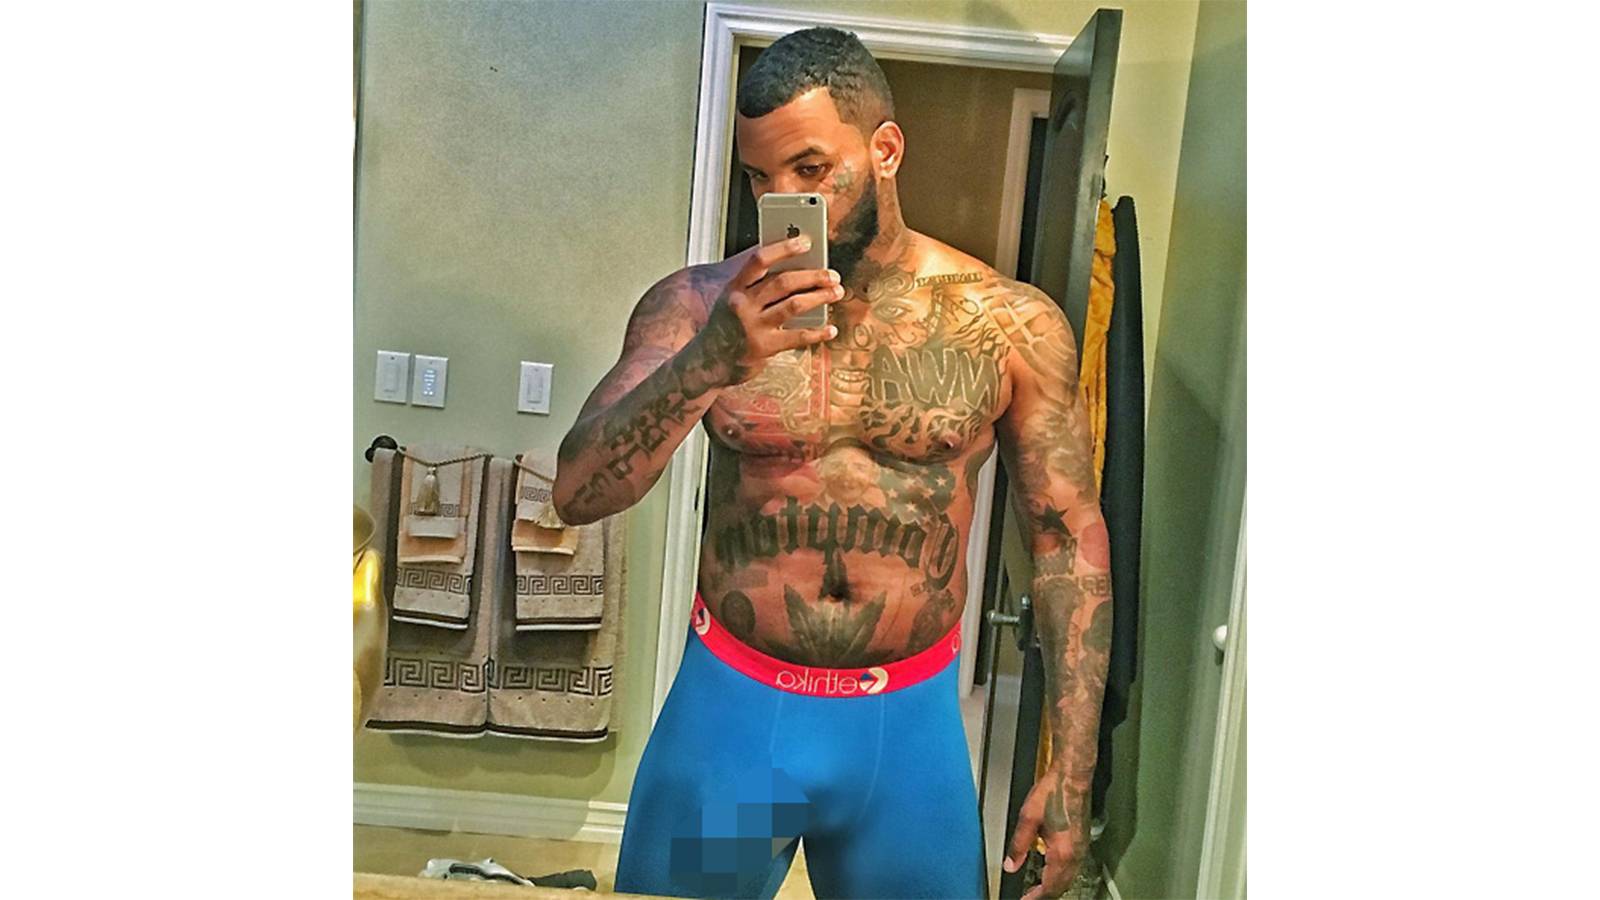 The Game S Penis Print Is An Early Christmas T For Underwear Sales News Bet